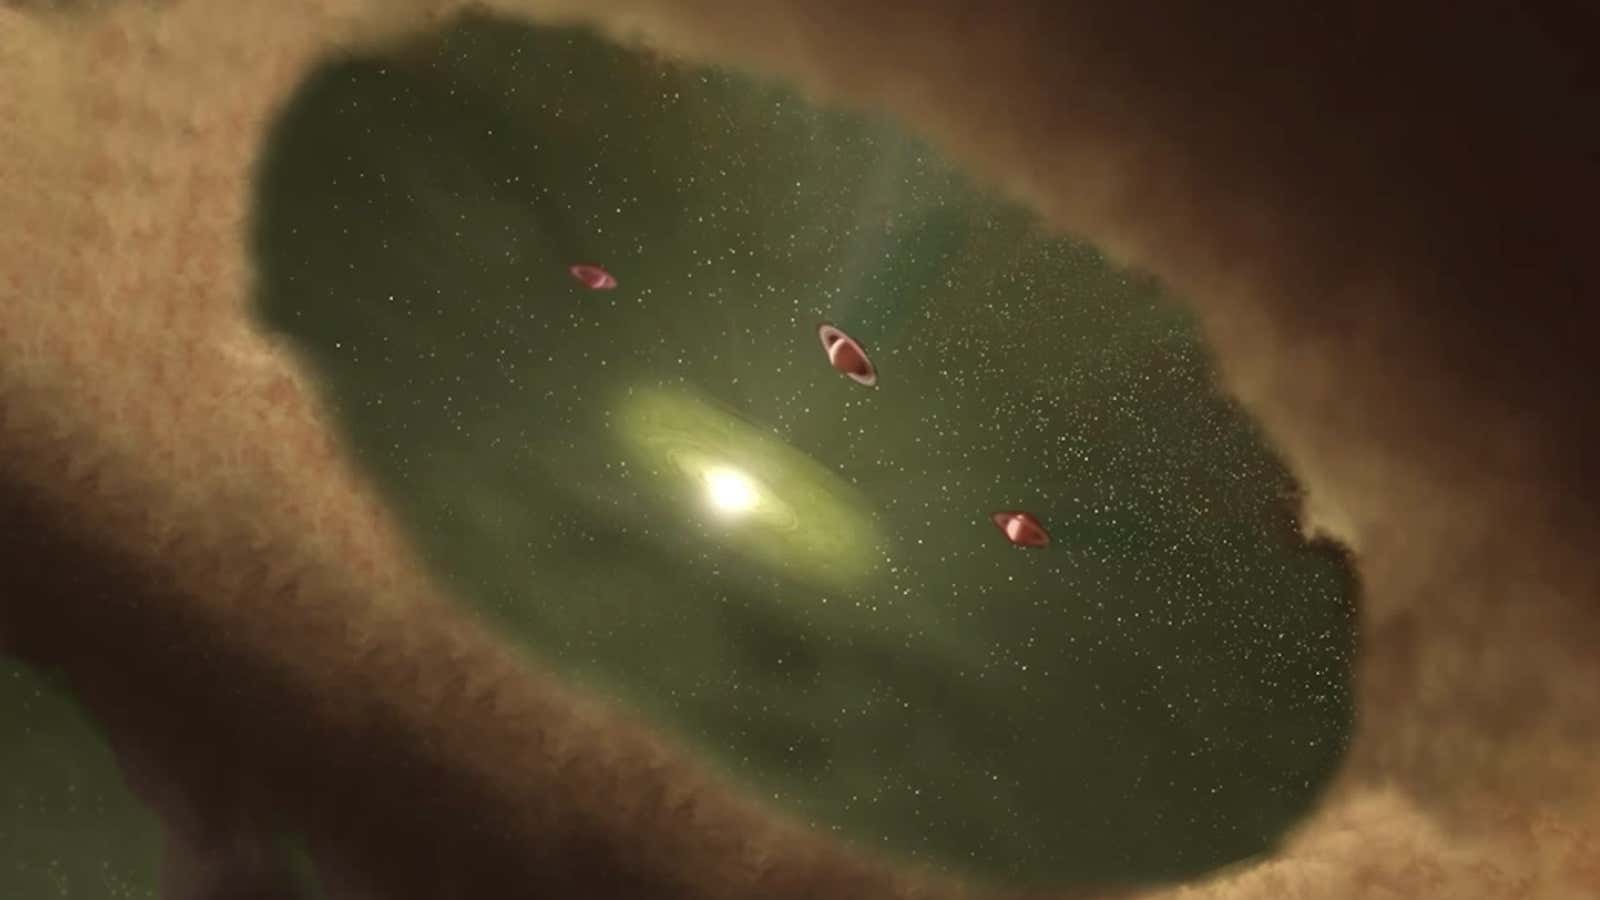 Watch a new planet being born from cosmic dust